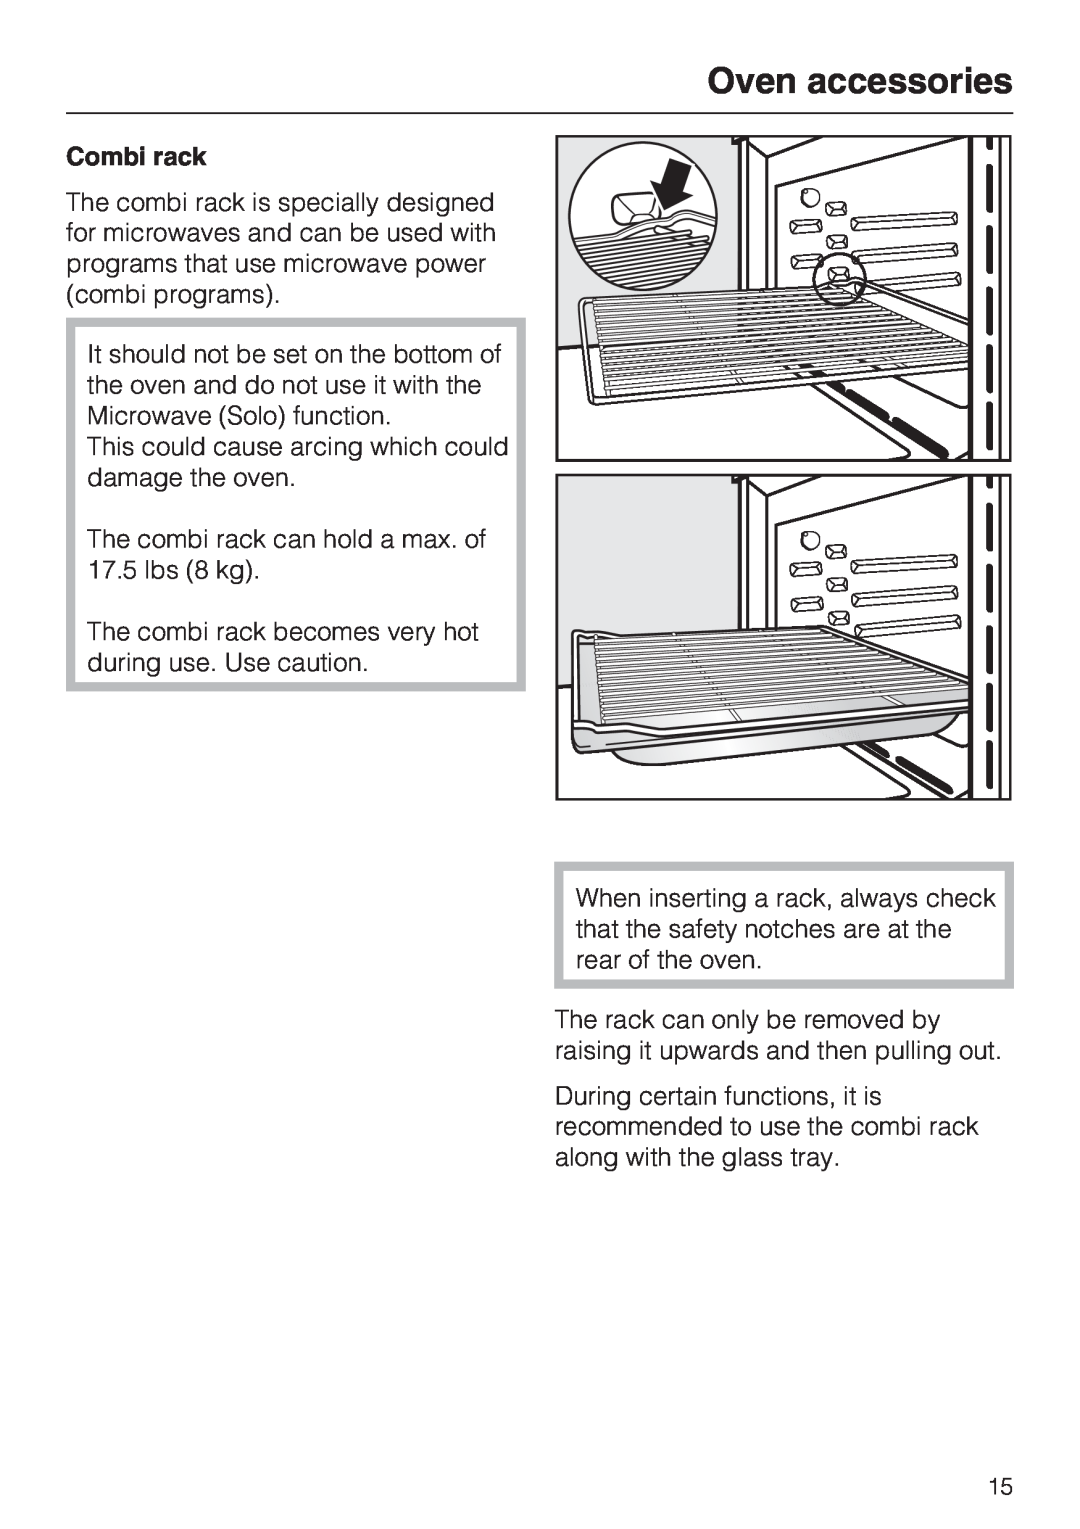 Miele H 4044 BM installation instructions Combi rack, Oven accessories 